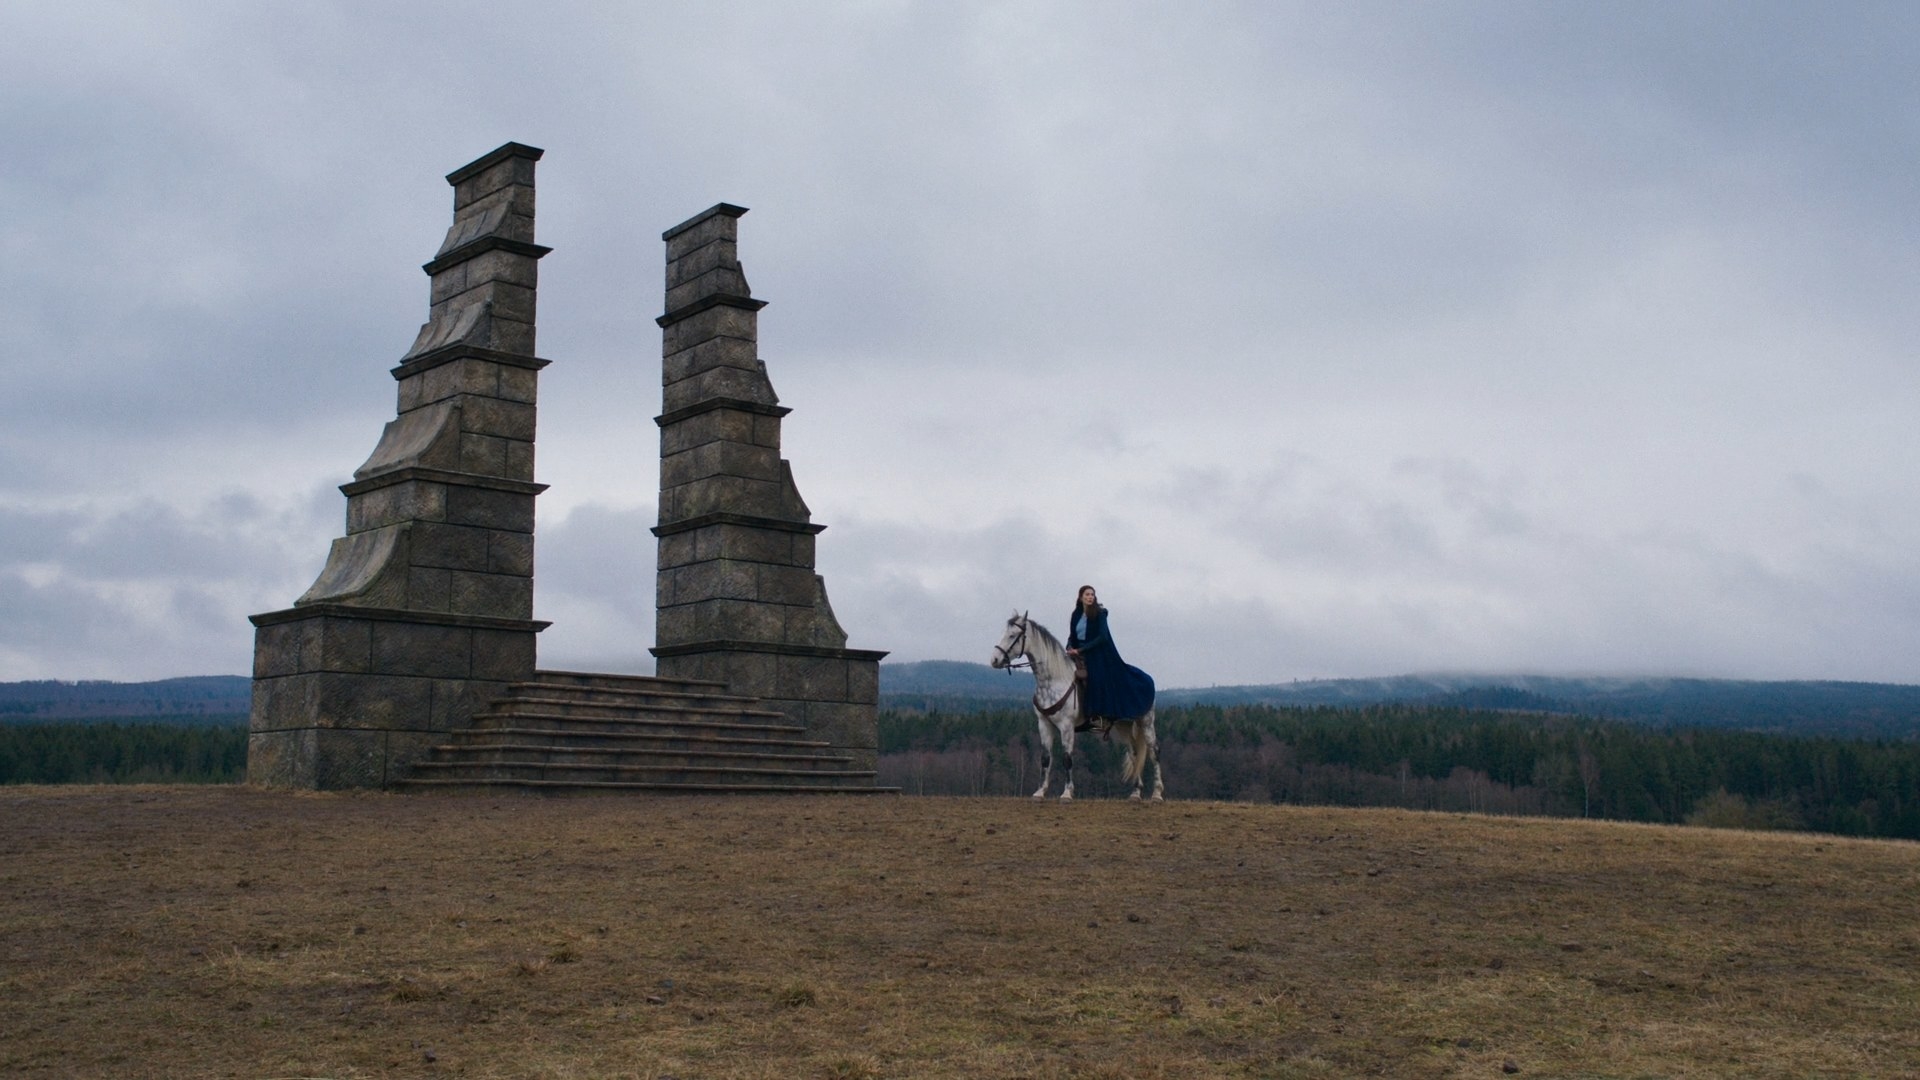 A long shot of Moiraine on her white horse, Aldieb. She is on a treeless hilltop with short brown grass in front of a large stone structure. It has two tall sides rising from a set of steps up towards an opening, but seemingly leads to nowhere